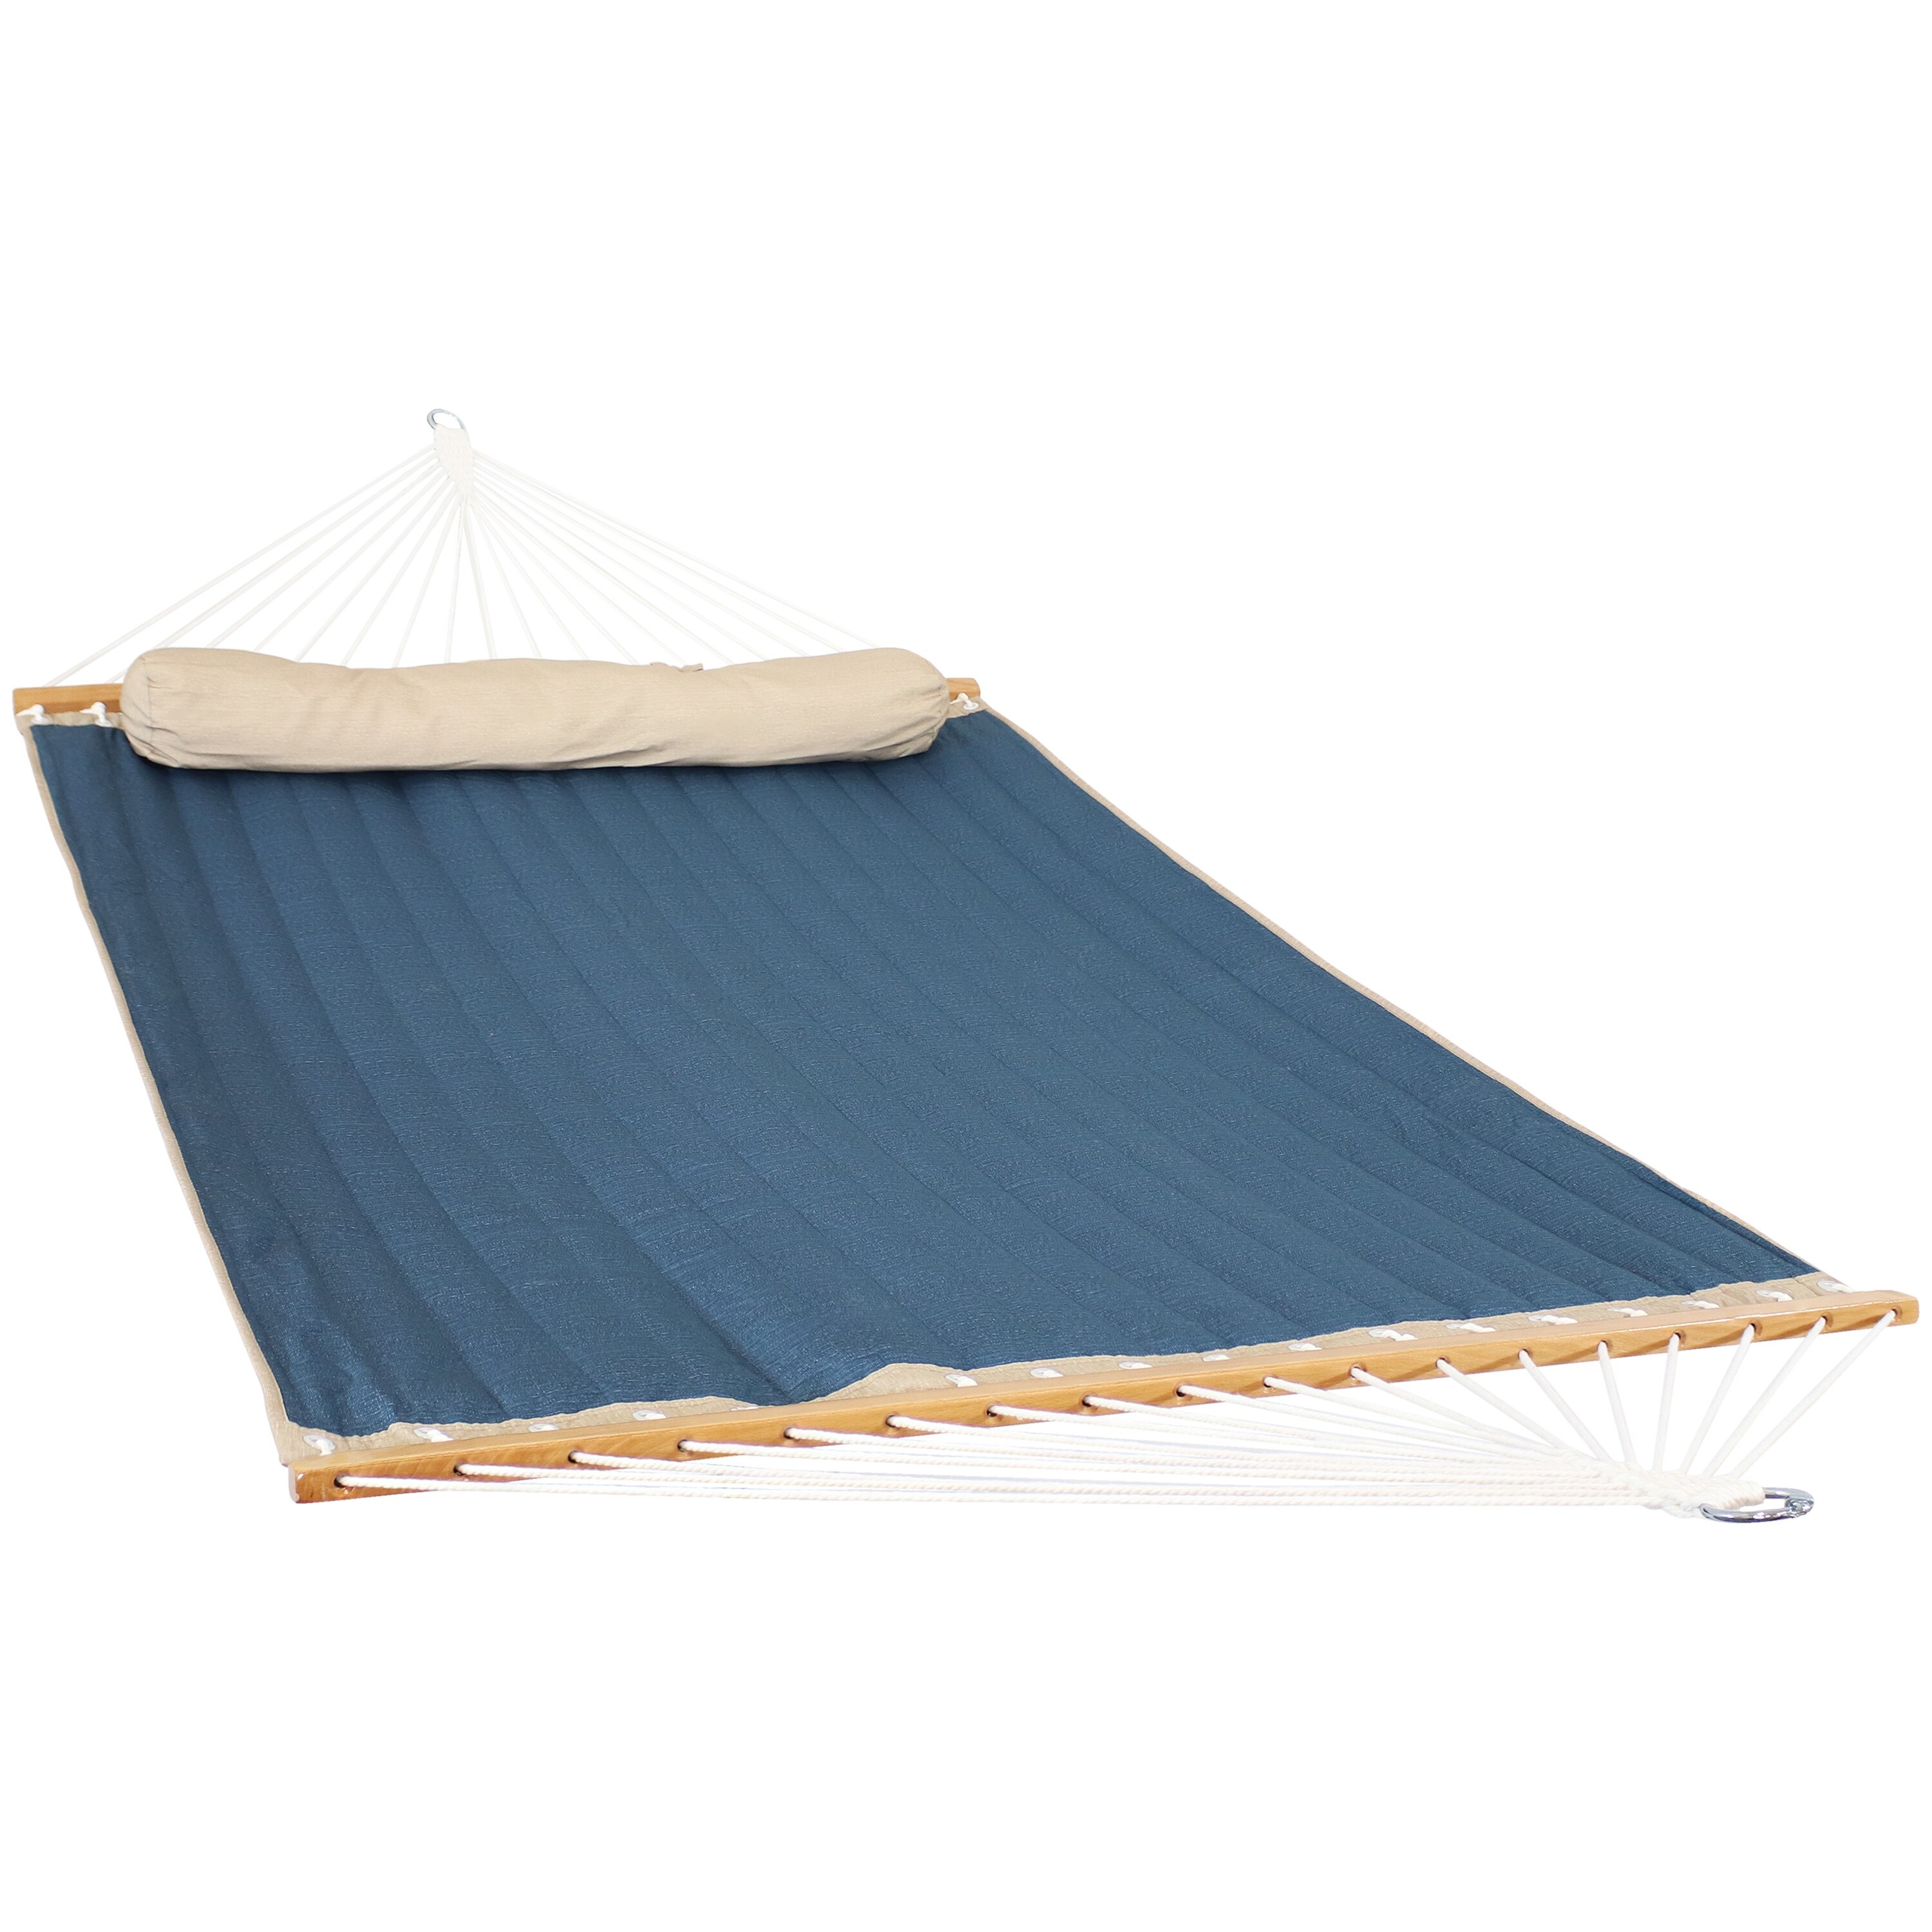 Sunnydaze Decor Sunnydaze 2-Person Quilted Spreader Bar Hammock Bed with Pillow - Tidal Wave